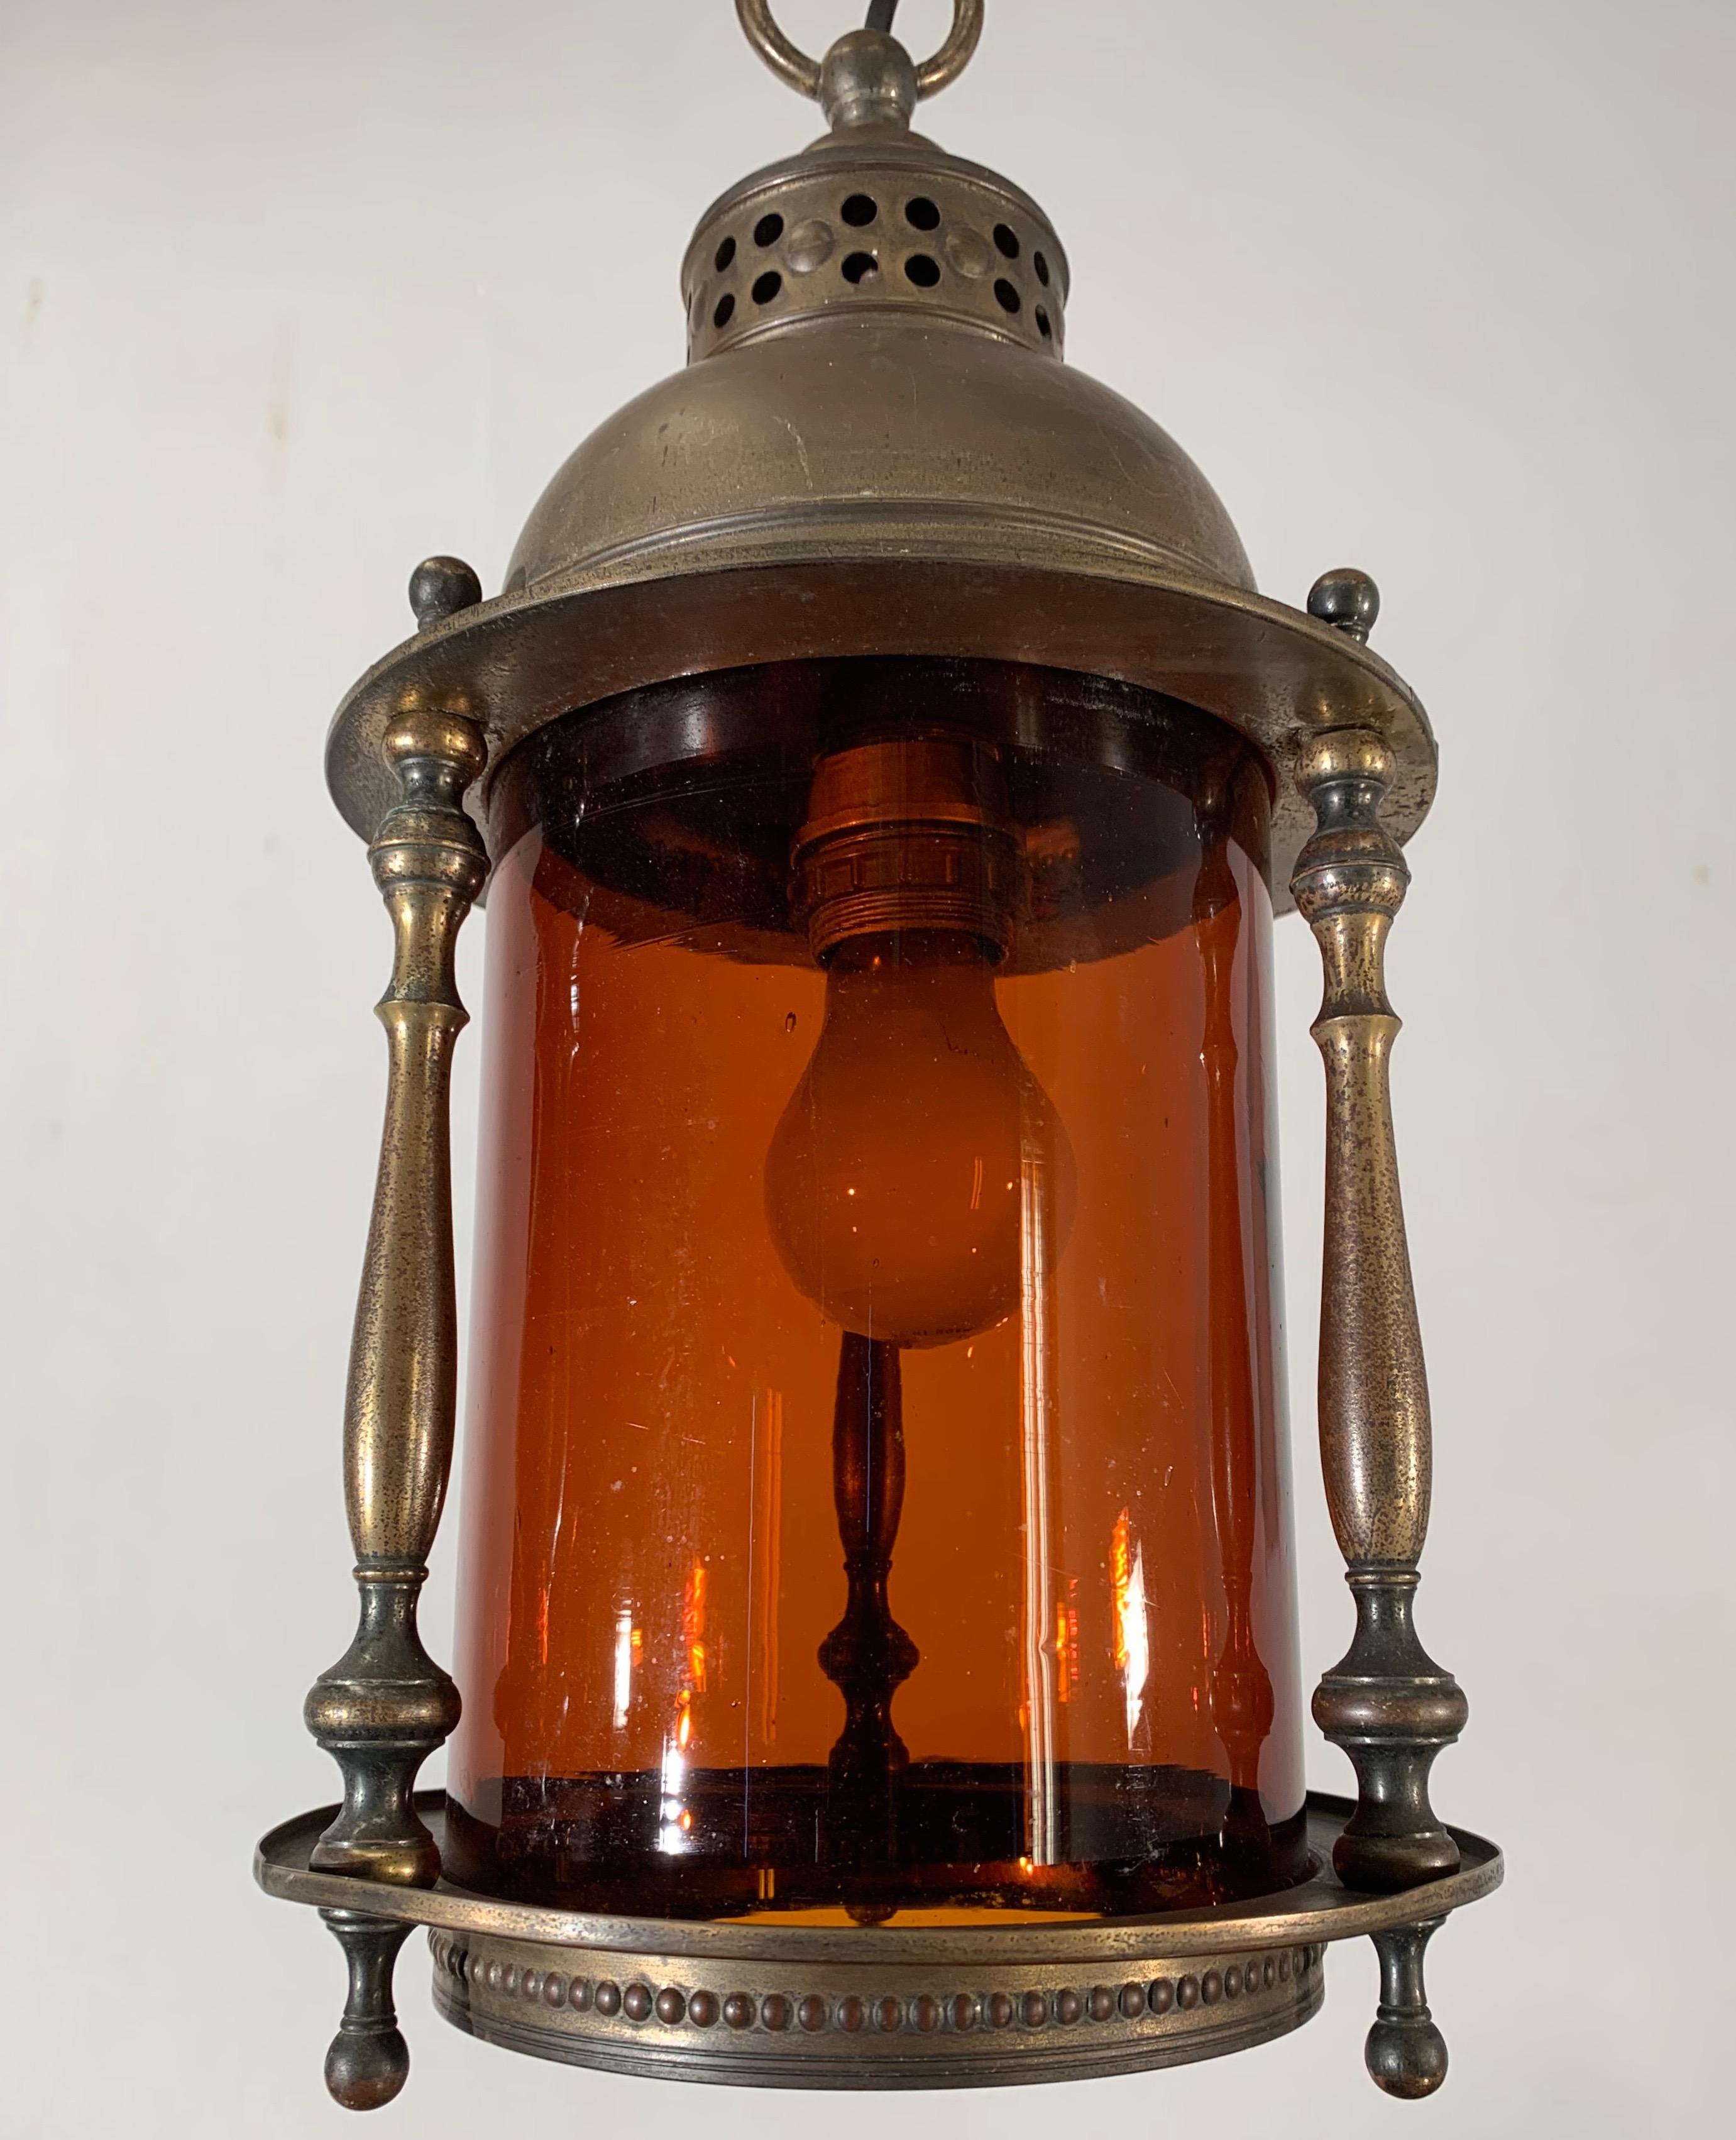 Rare ships lantern inspired light fixture with original round glass

If you are looking for a stylish Arts & Crafts pendant to create a warm atmosphere in your entrance, in your bedroom, on your landing or in a space for relaxing then this